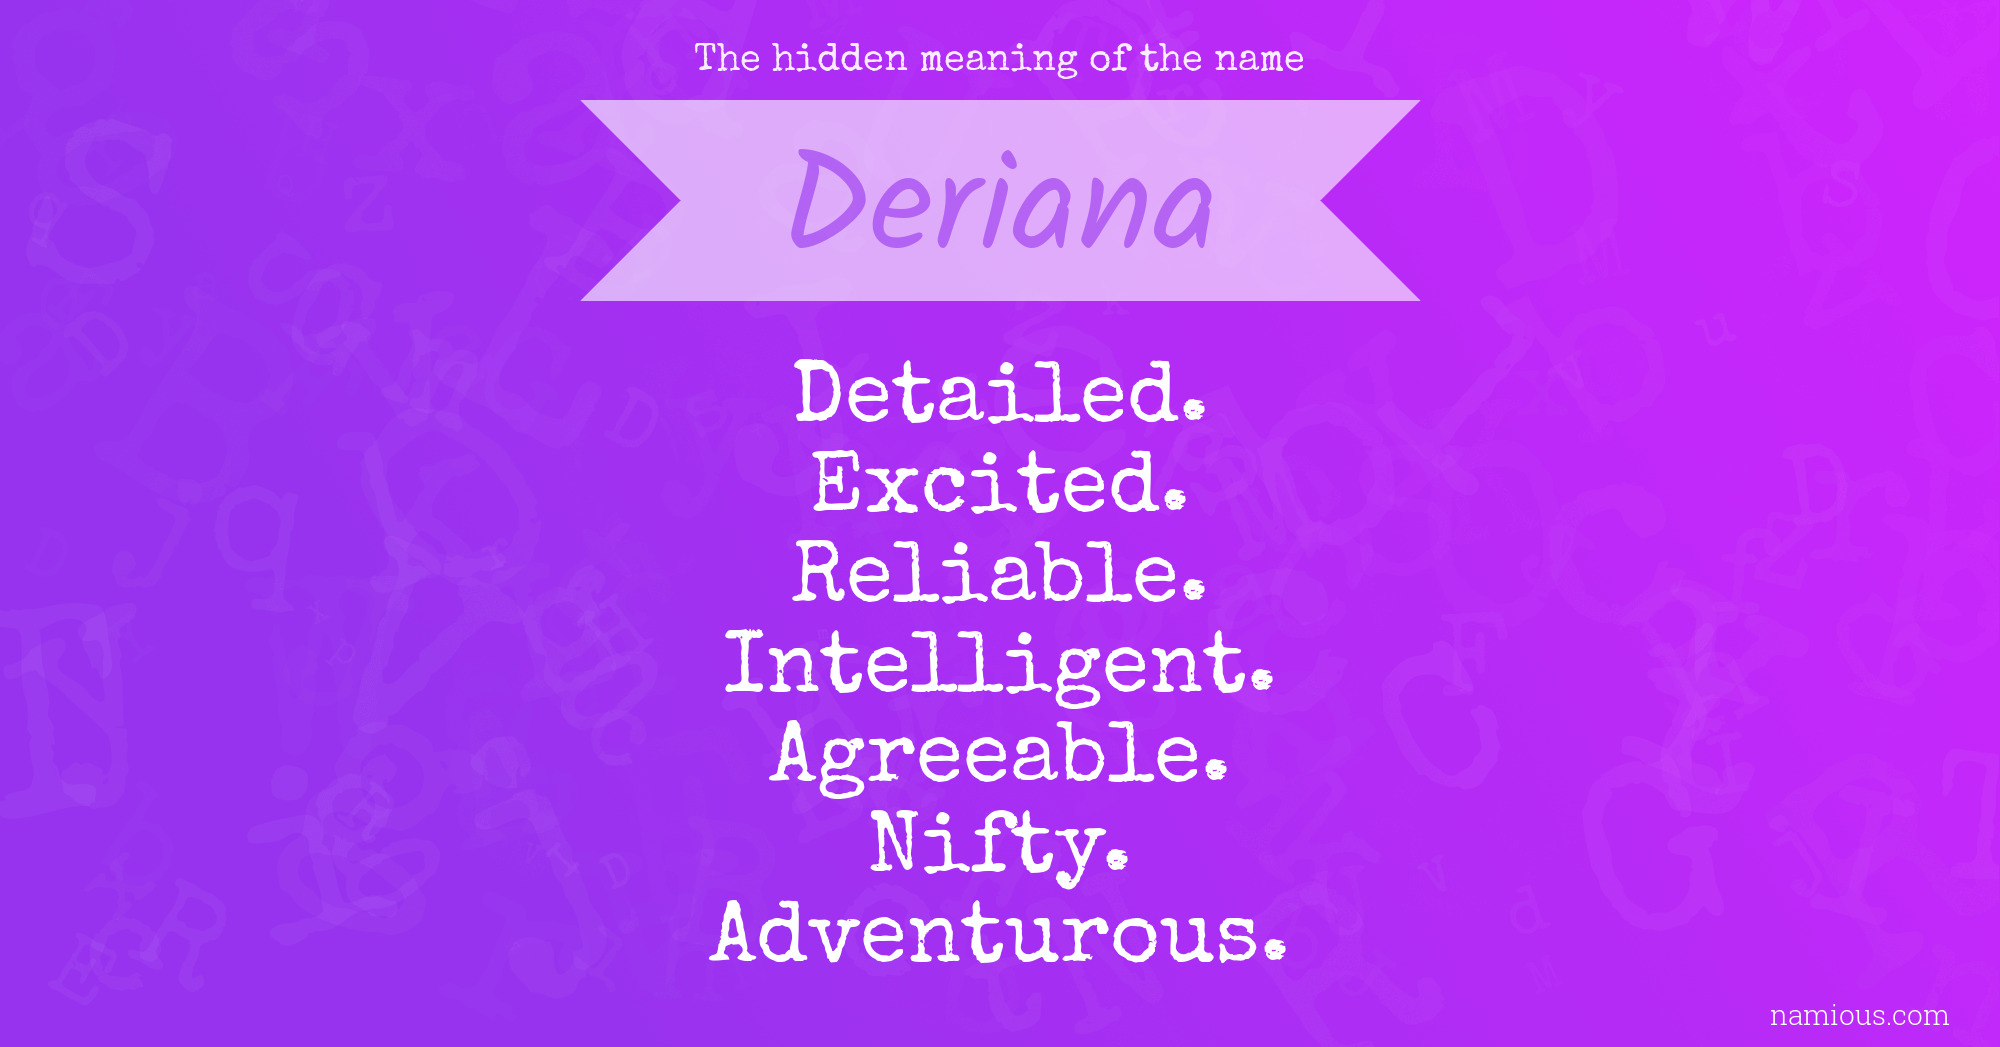 The hidden meaning of the name Deriana